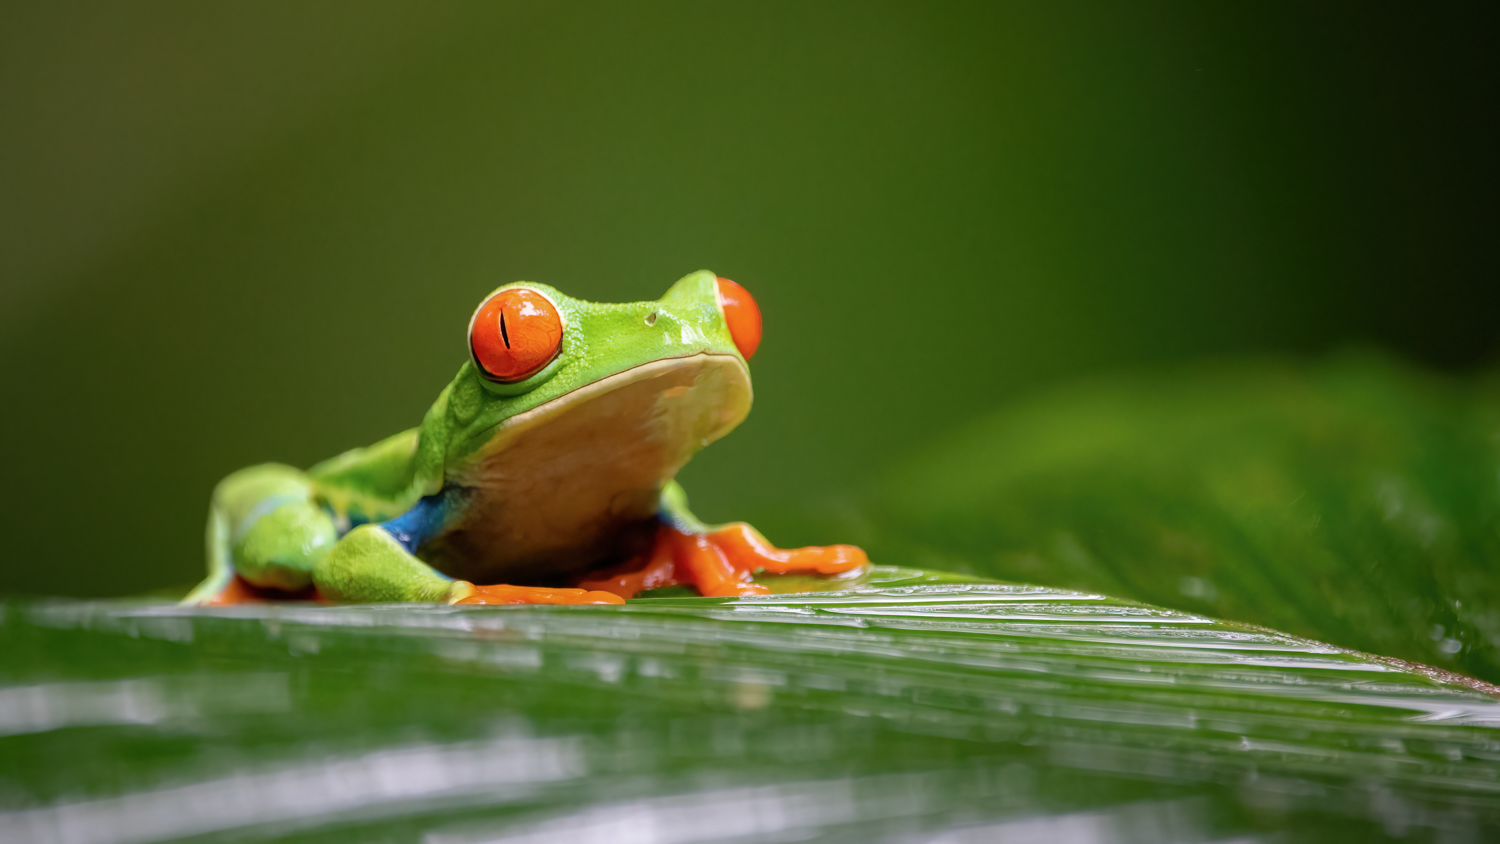 Wildlife of the Week: Red-eyed tree frog – The Daily Evergreen